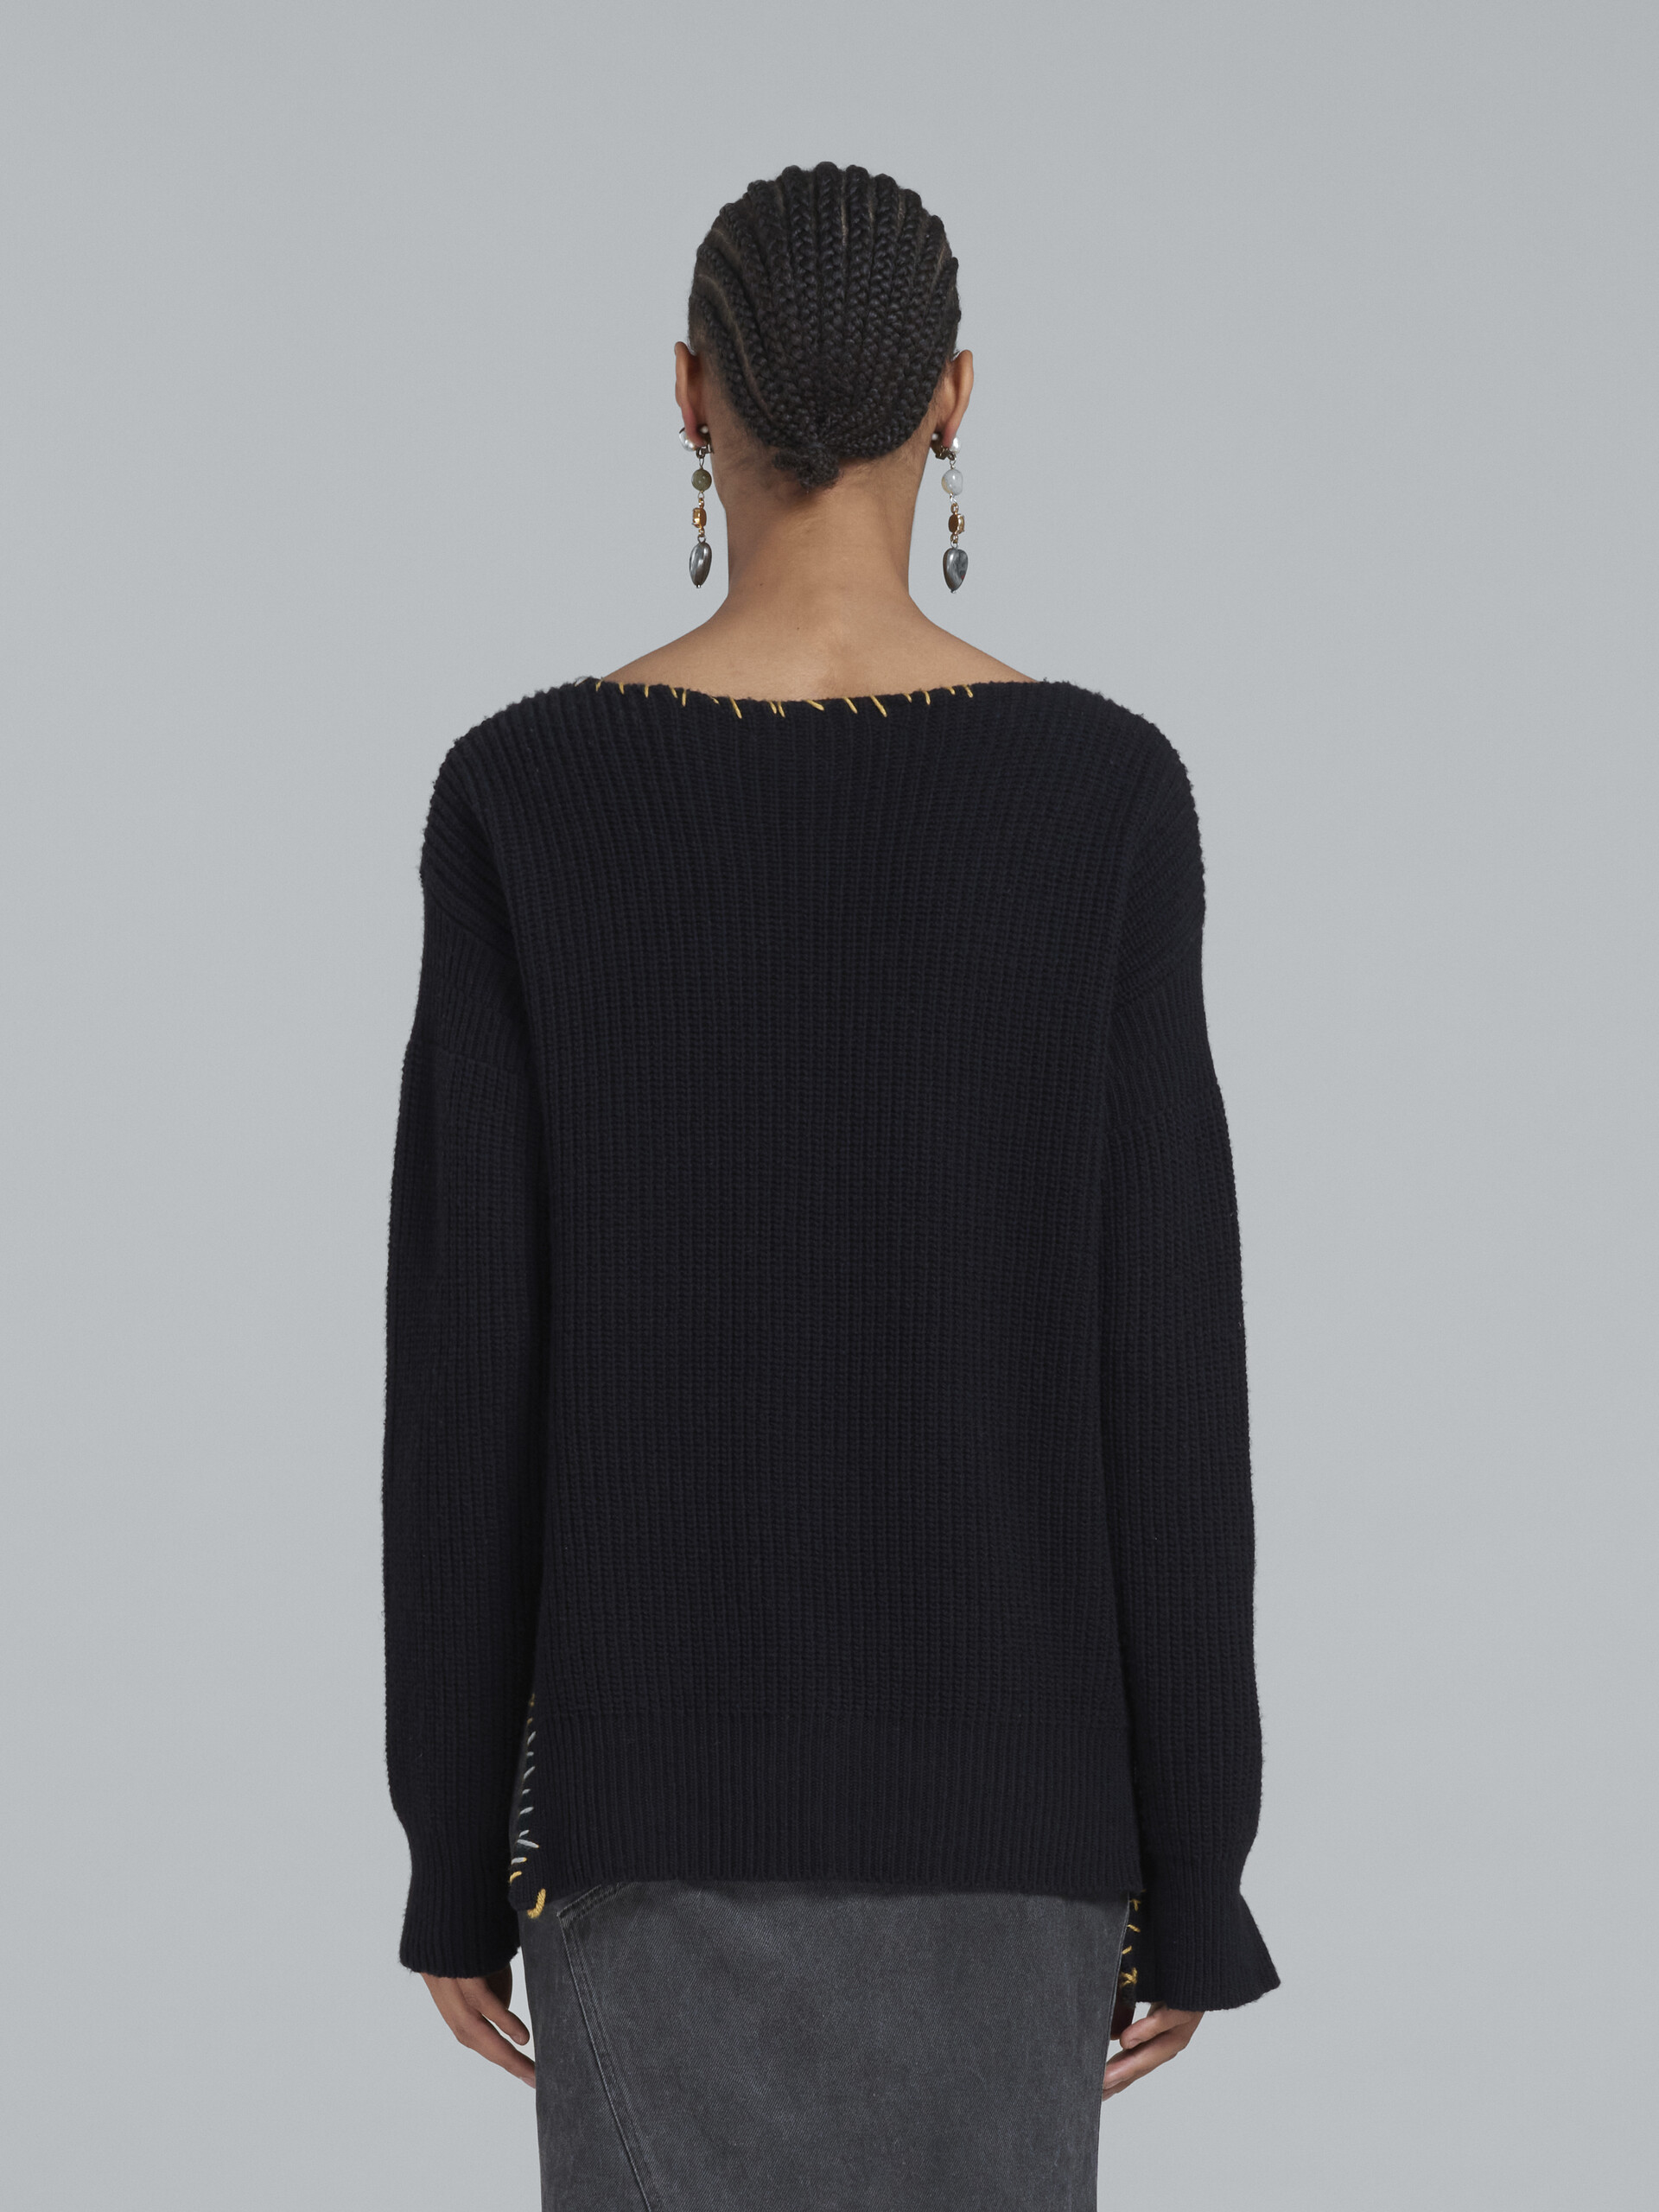 Black wool cardigan with raw-edge detailing - Pullovers - Image 3